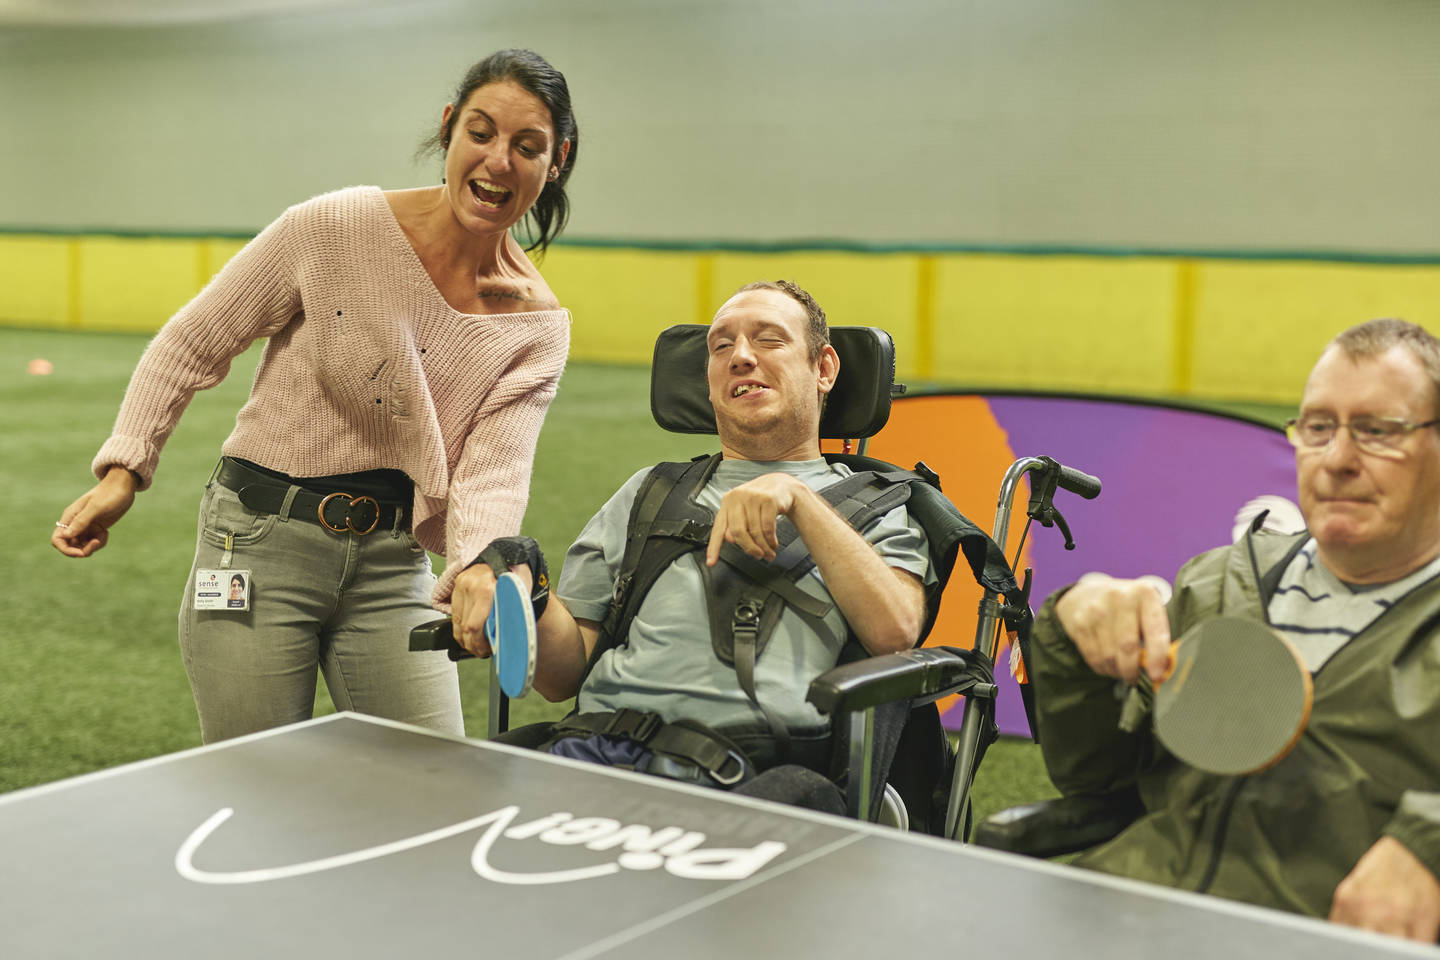 Two disabled men enjoying a game of table tennis with a supporter